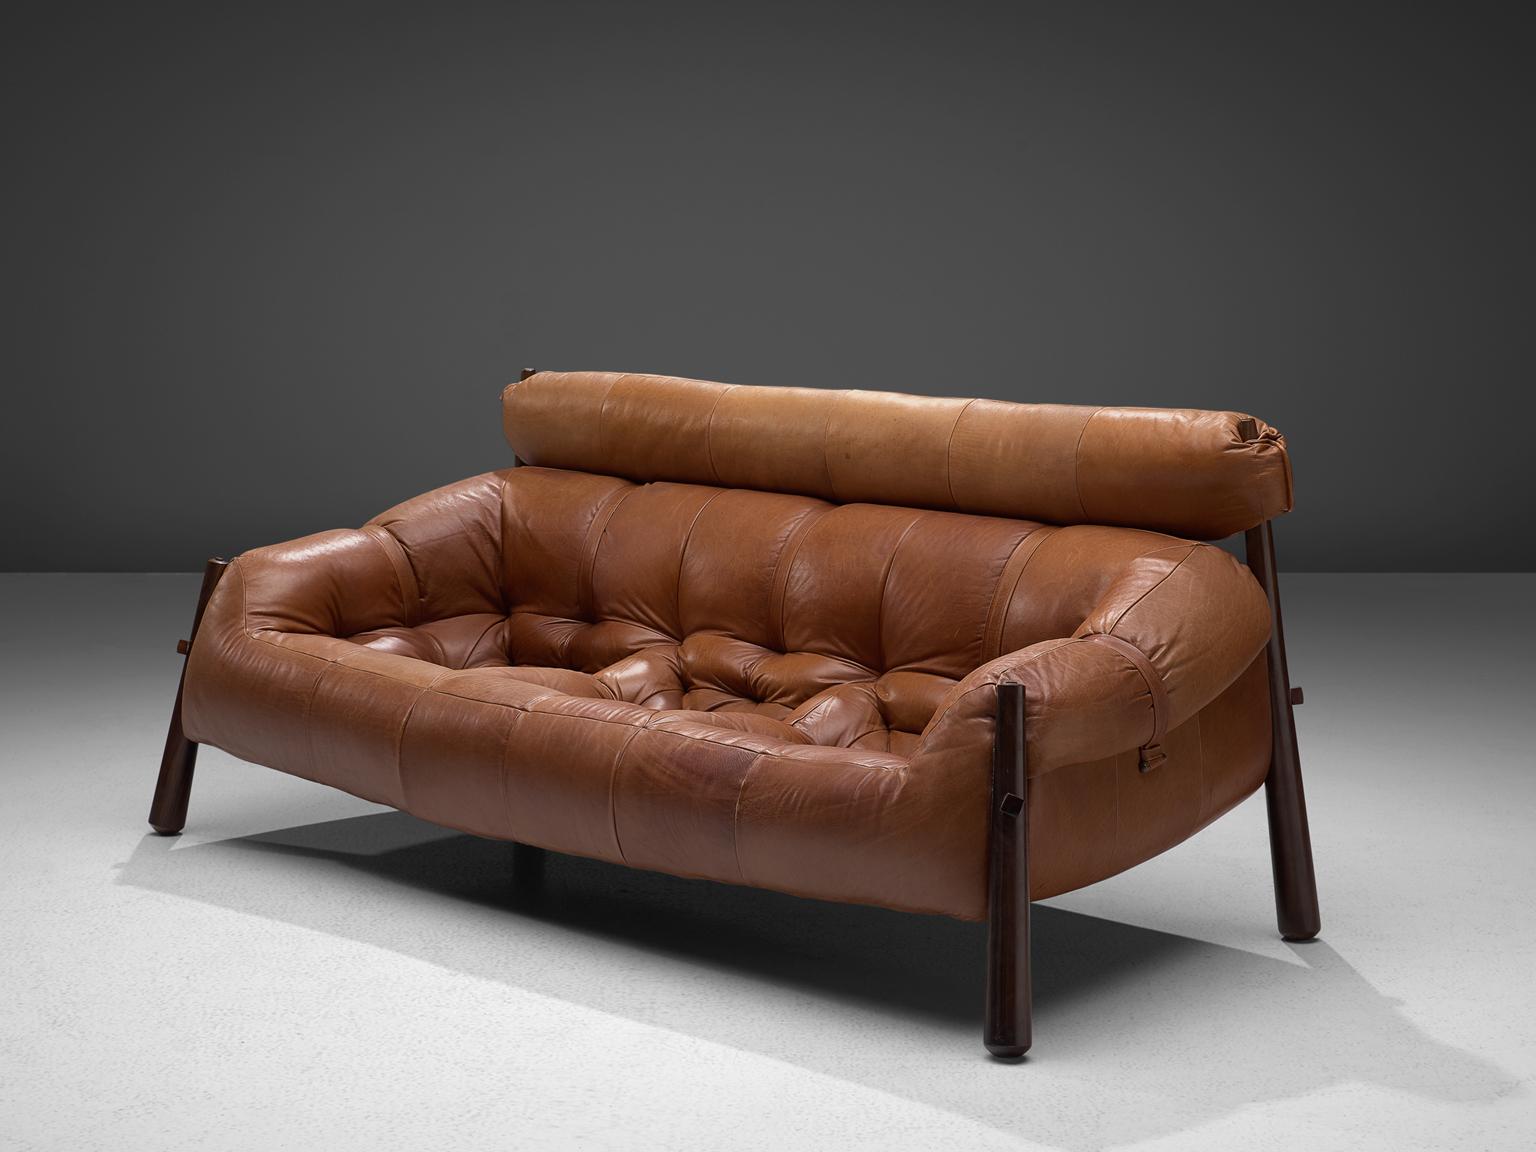 Percival Lafer, sofa model MP-81, in rosewood and leather, Brazil, 1972.

Beautiful sofa by Brazilian designer Percival Lafer. This sofa consists of a solid dark wooden base to which the leather seating is attached. The tufted cognac leather